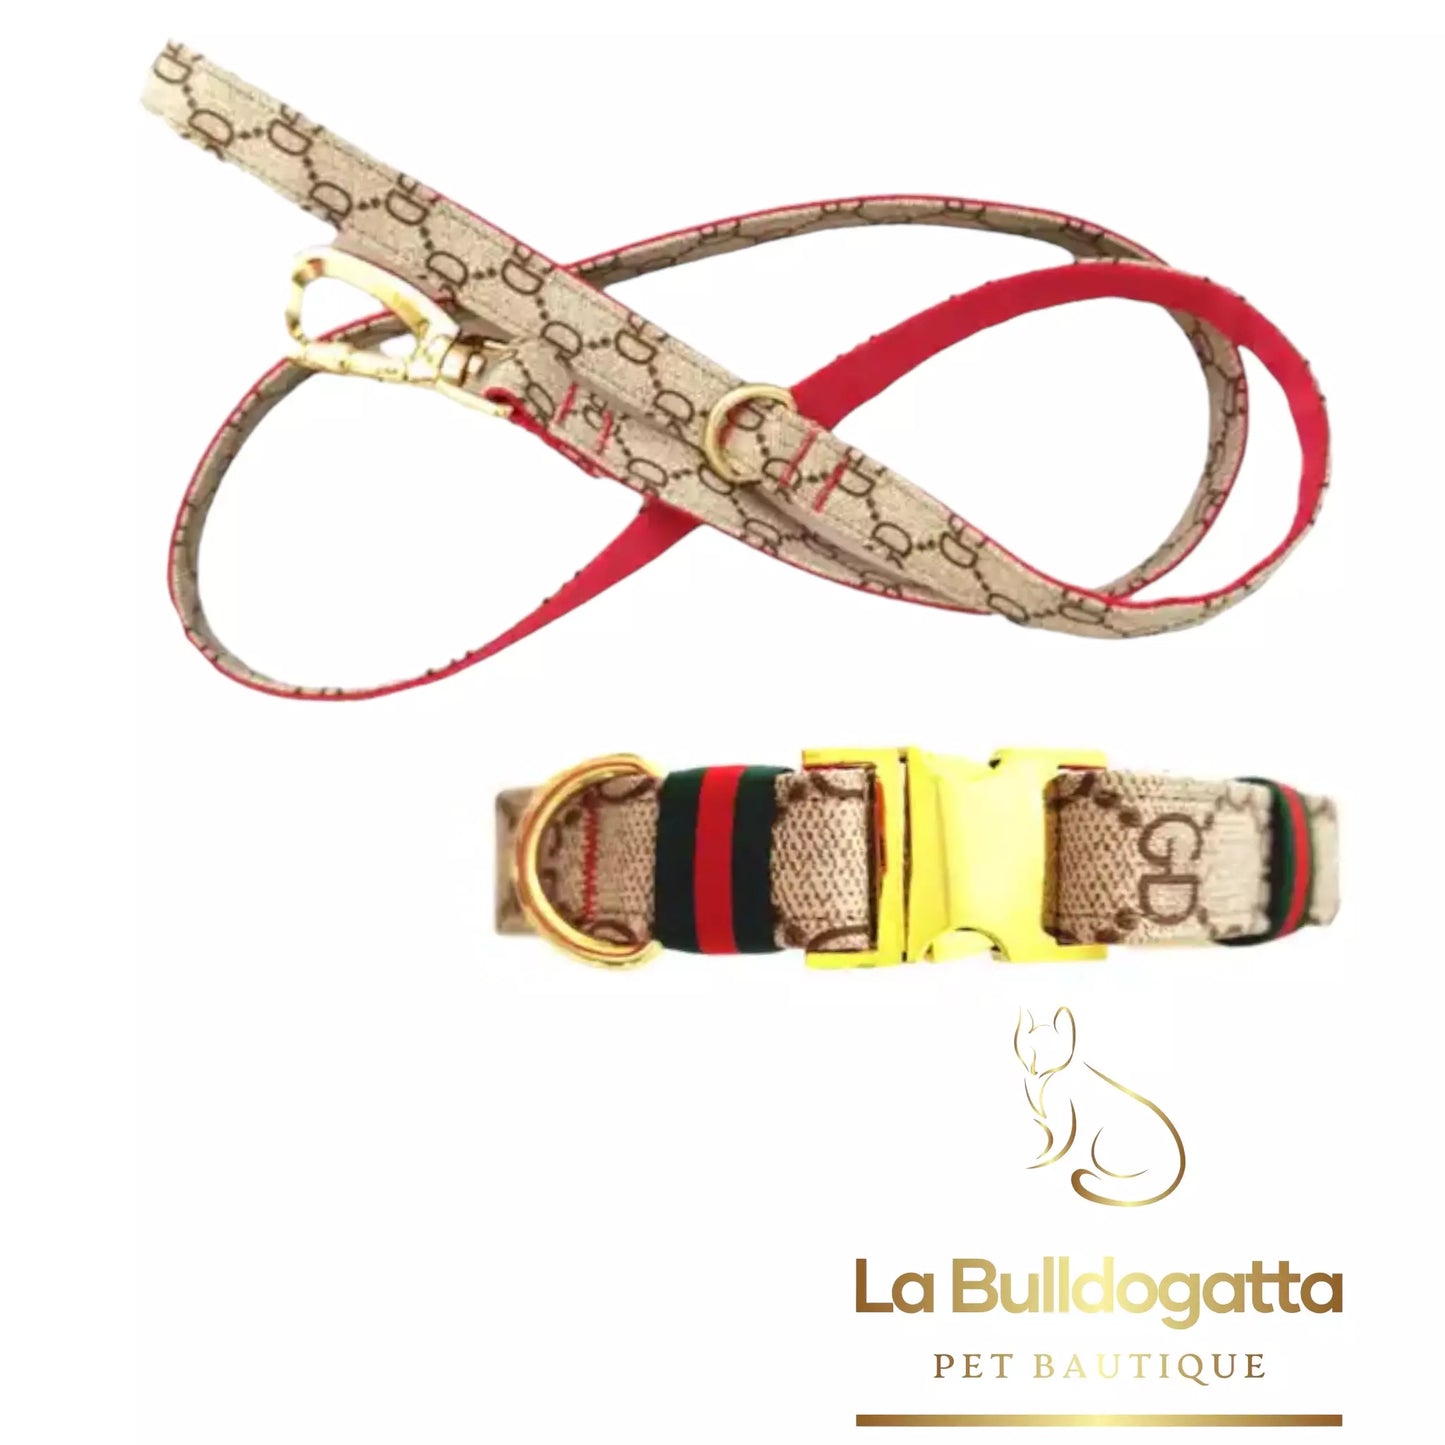 GD allover collar and leash